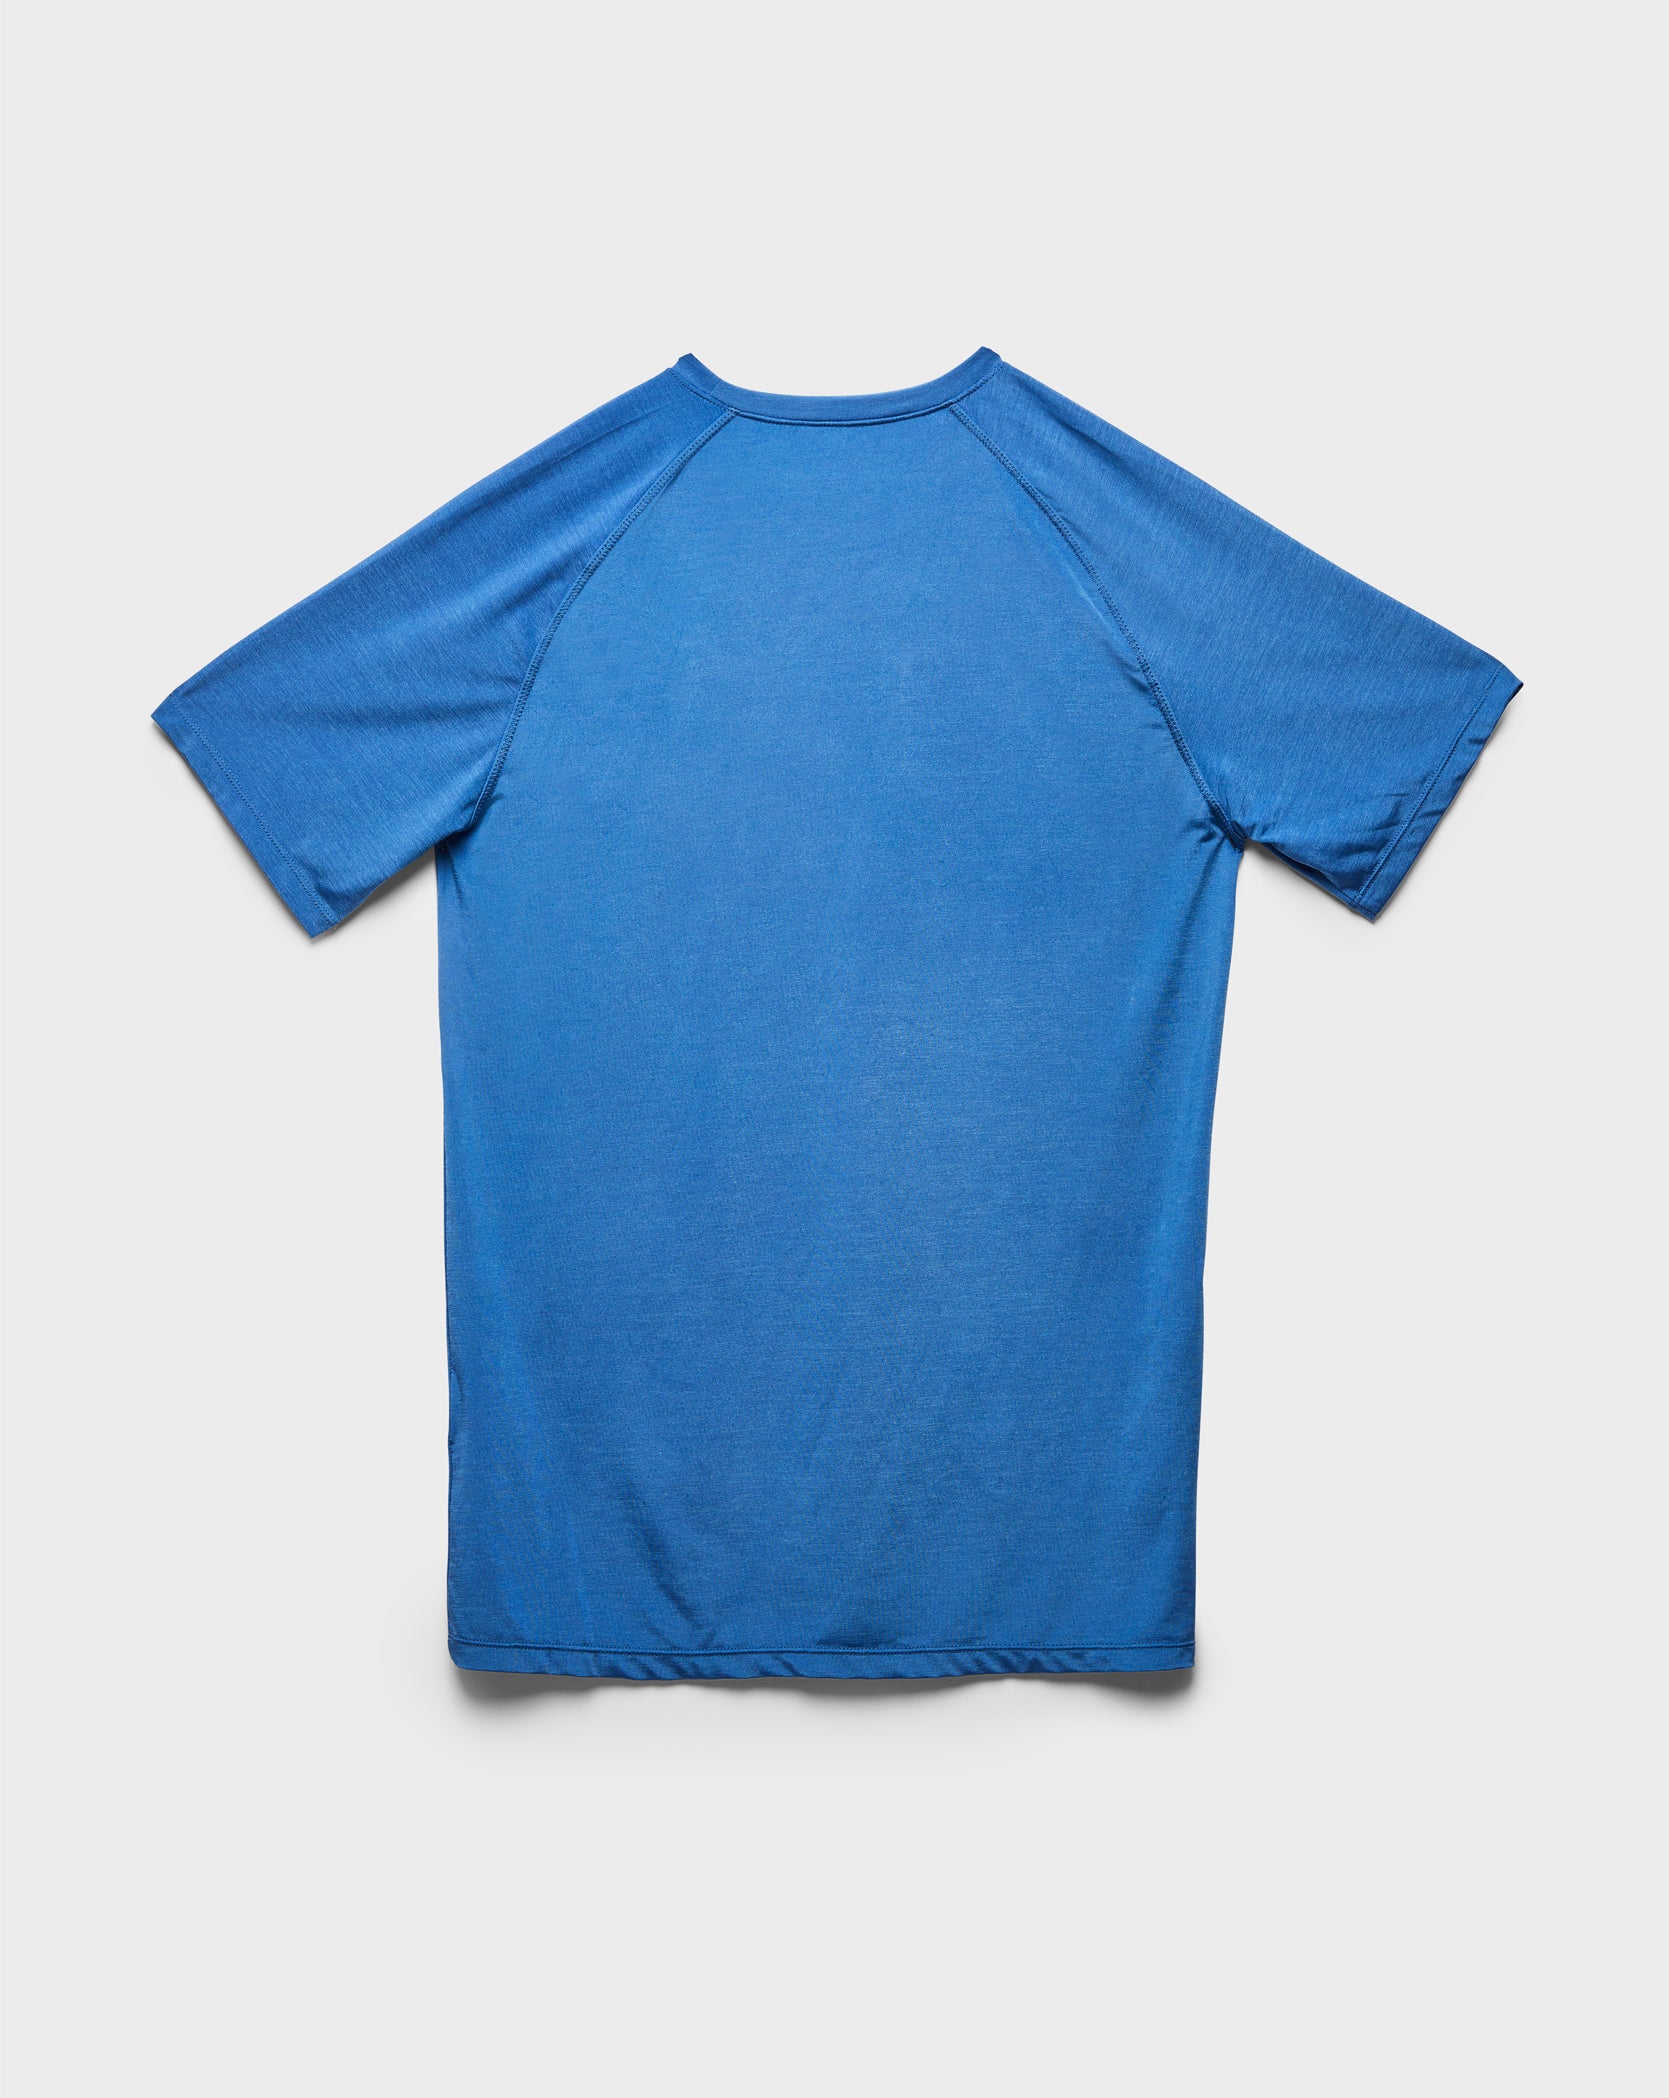 Twinzz active blue t-shirt back